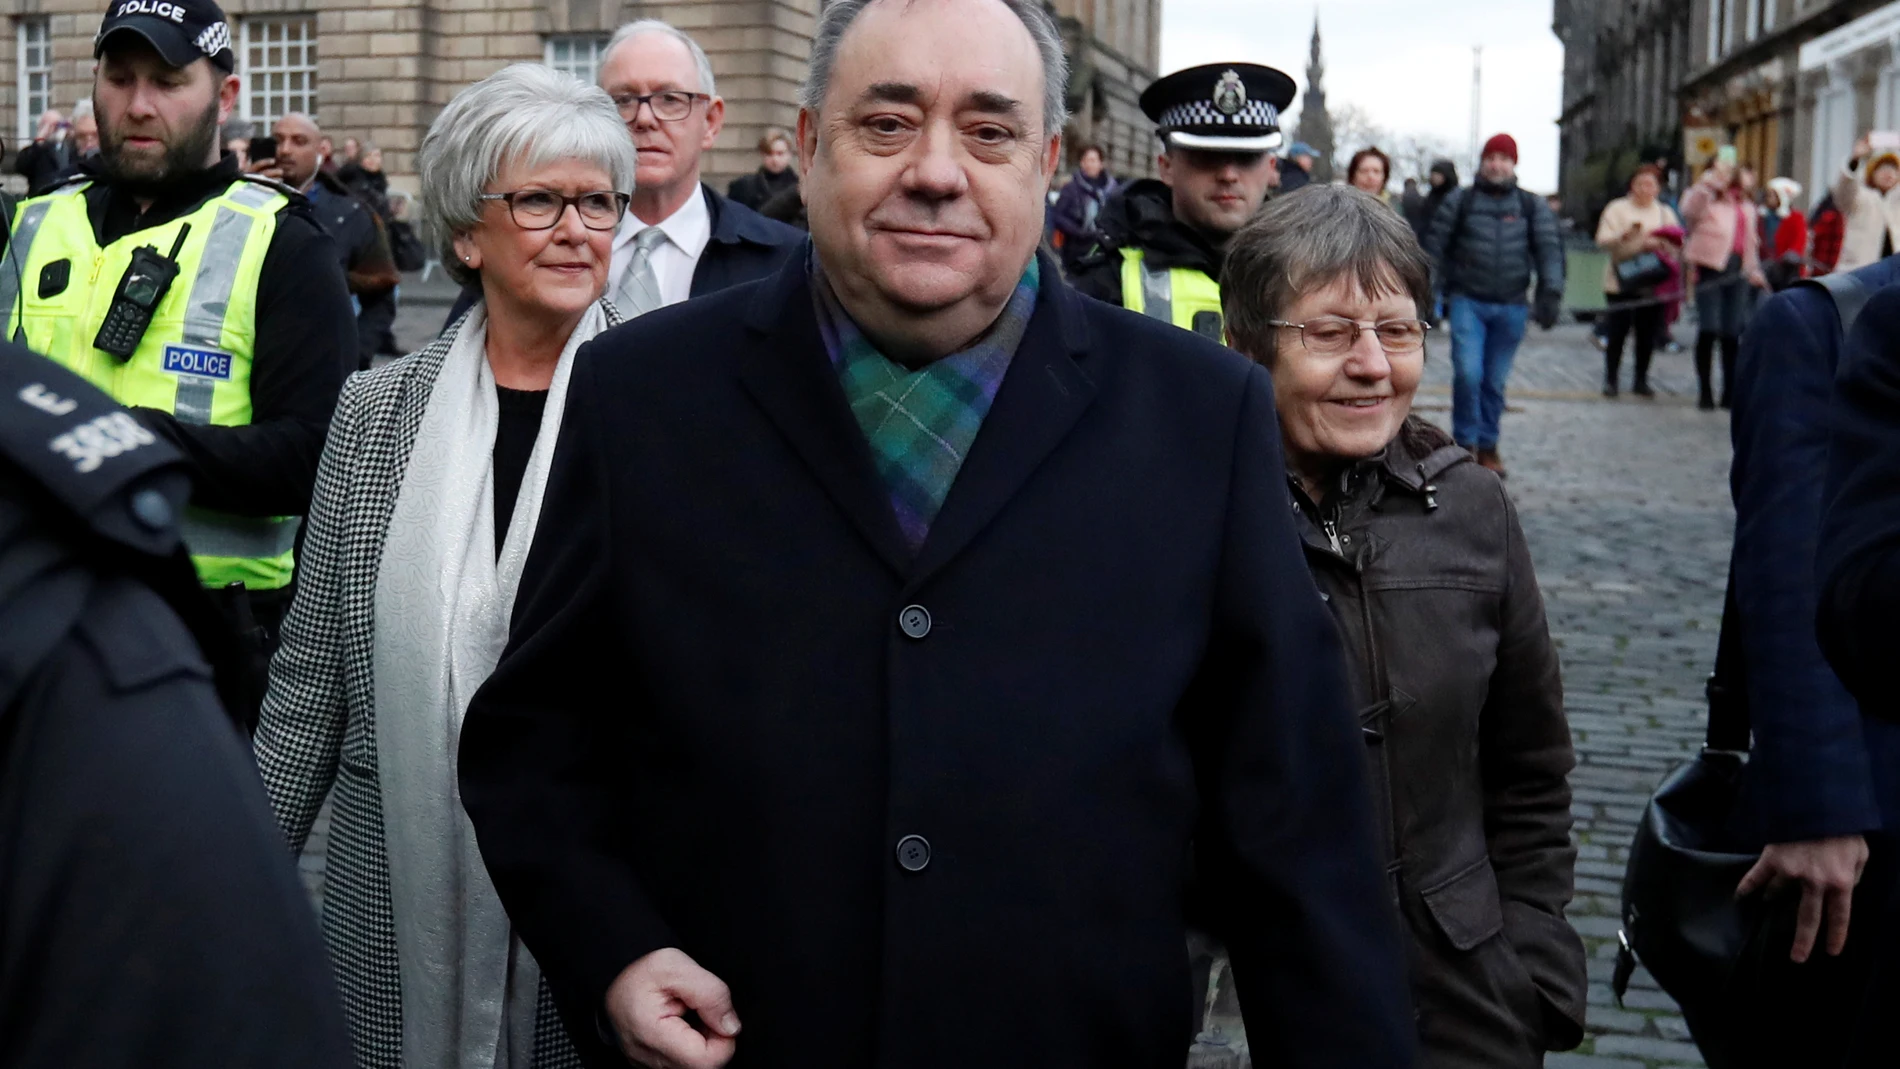 Former First Minister of Scotland Alex Salmond leaves the High Court in Edinburgh